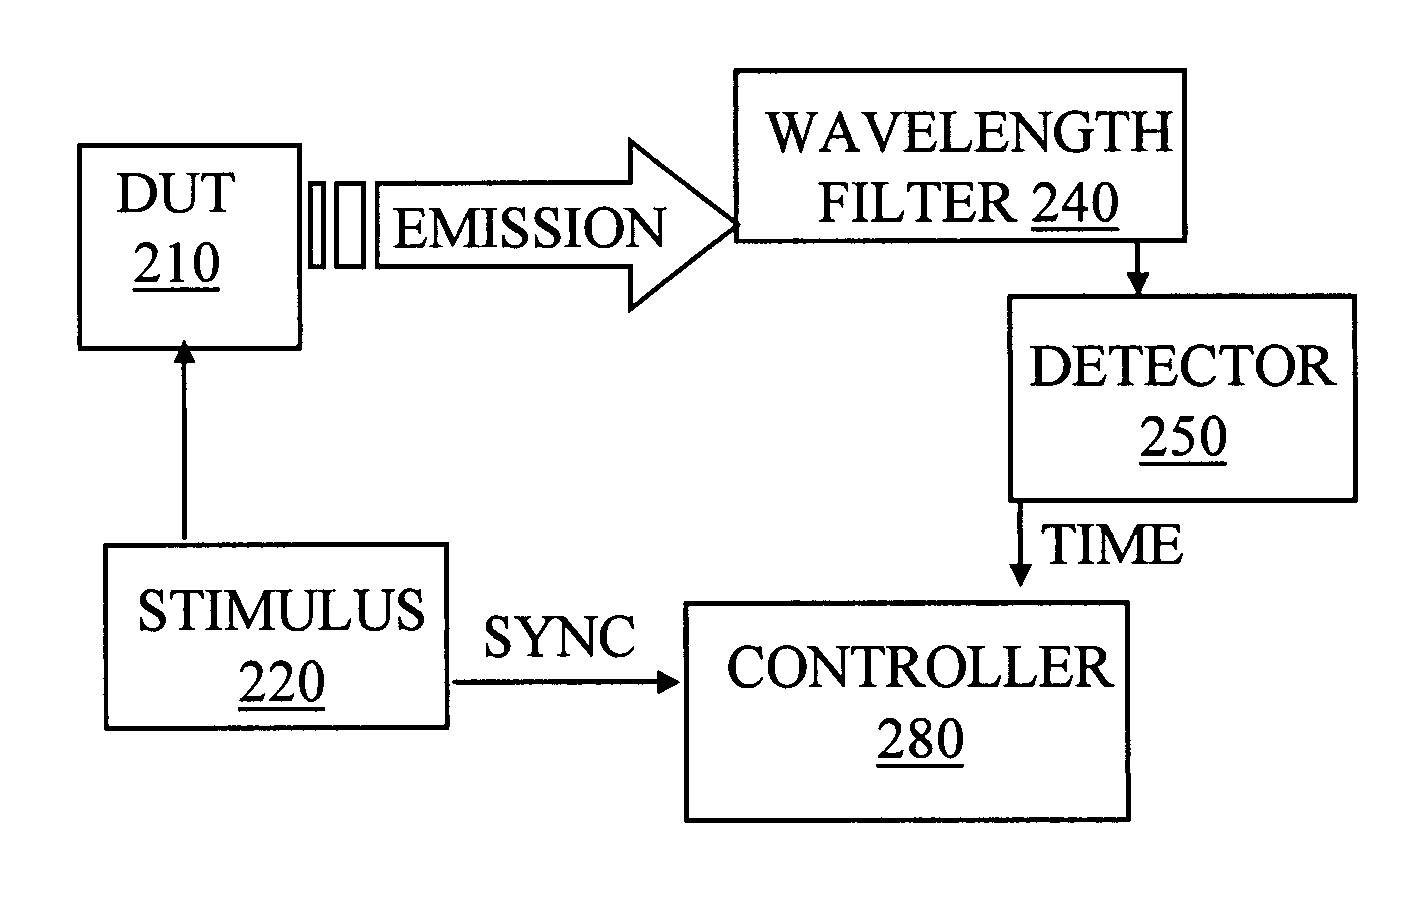 Time resolved emission spectral analysis system